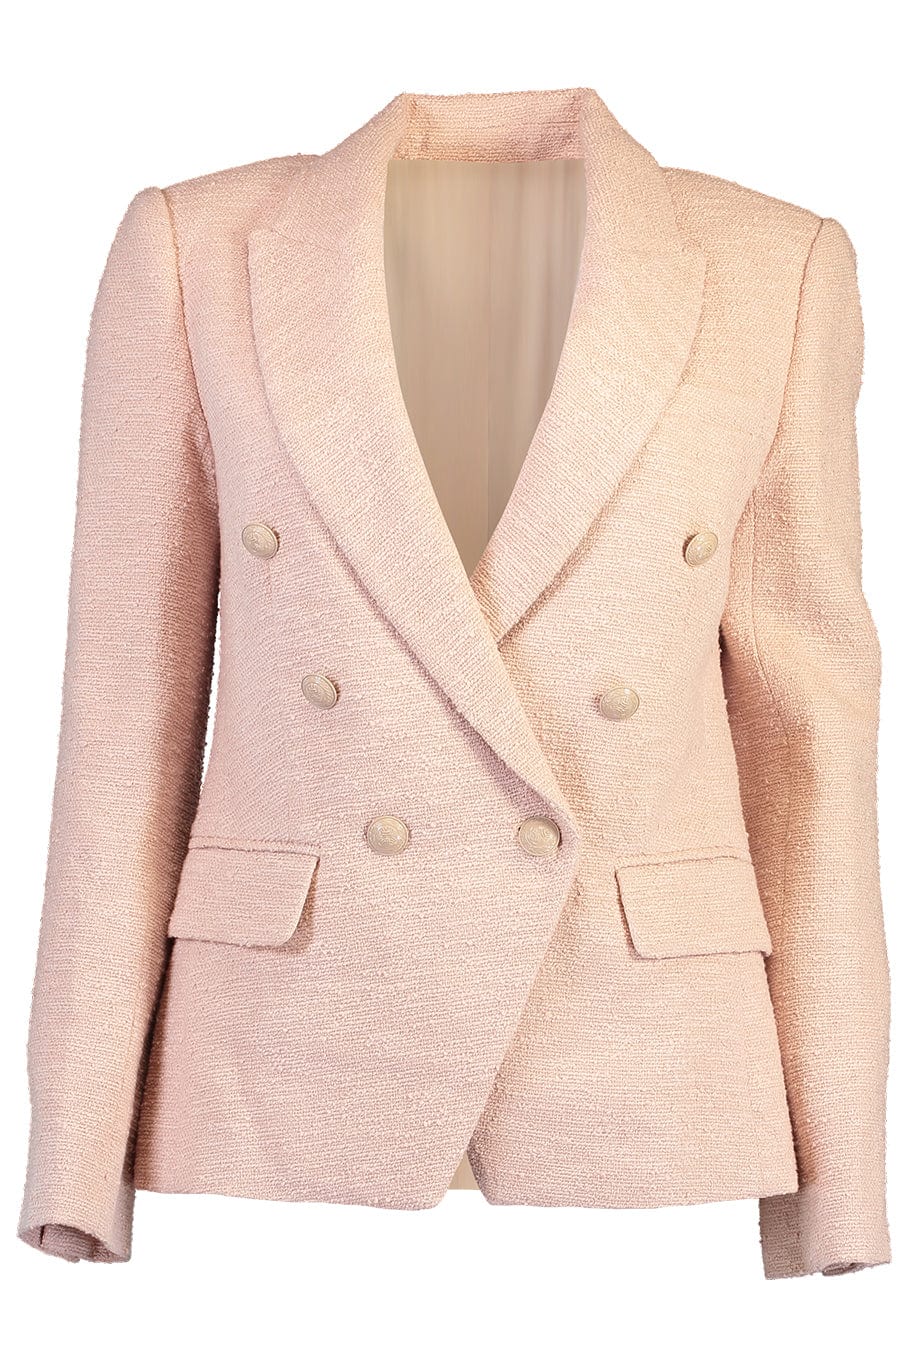 L'AGENCE-Kenzie Double Breasted Blazer-